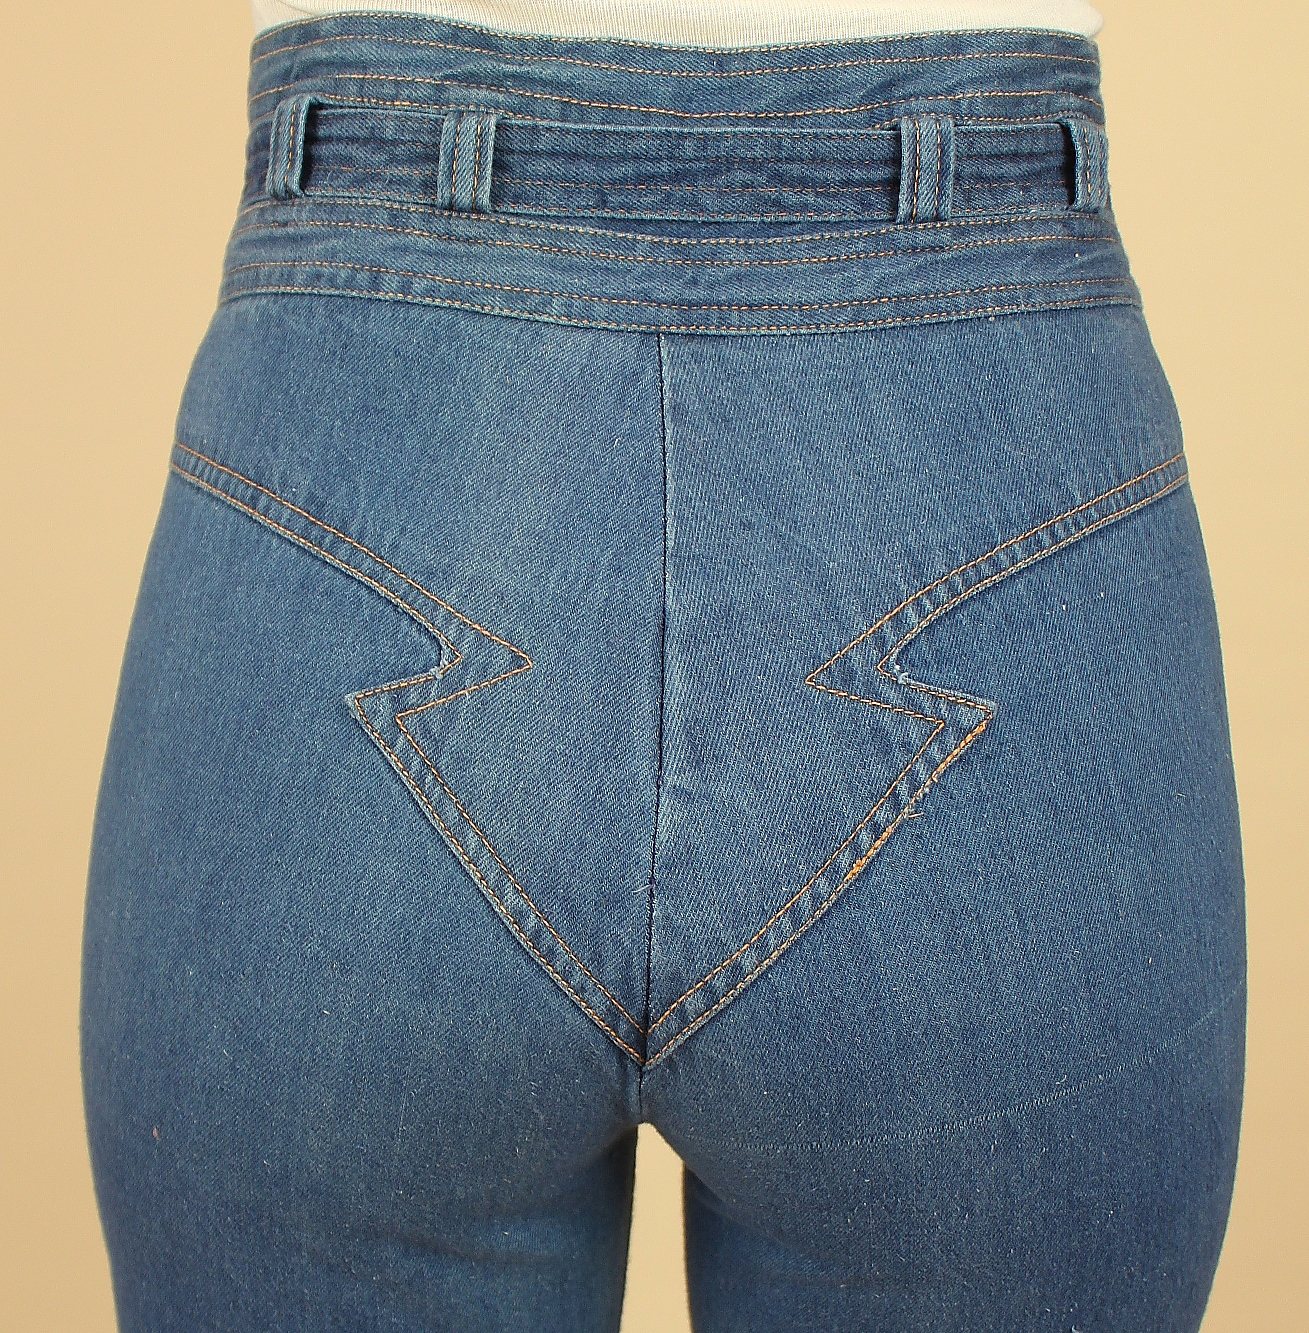 RARE Vintage 70's High Waisted BELL BOTTOM Jeans Nest Ce Pas? Glam ...